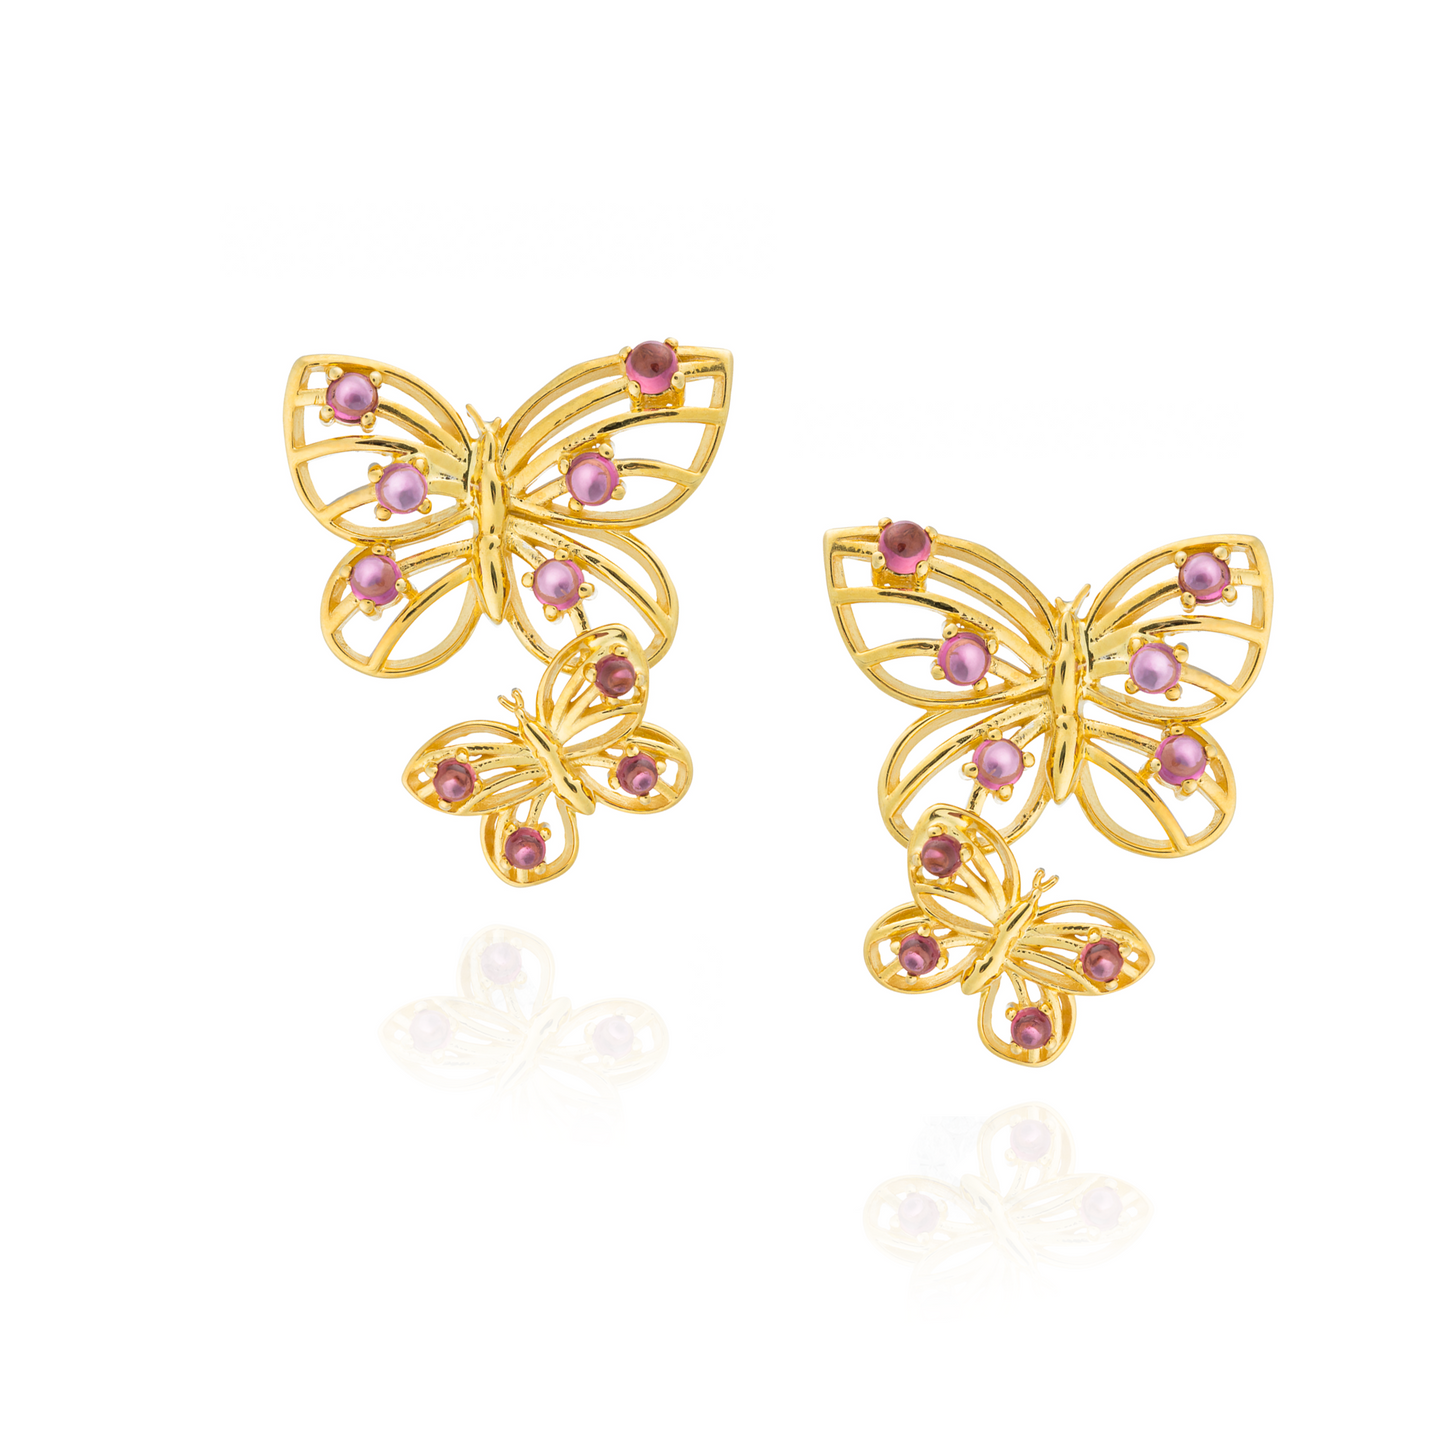 925 Silver Earrings  plated in 18k Yellow Gold with Rhodolite Cabouchon